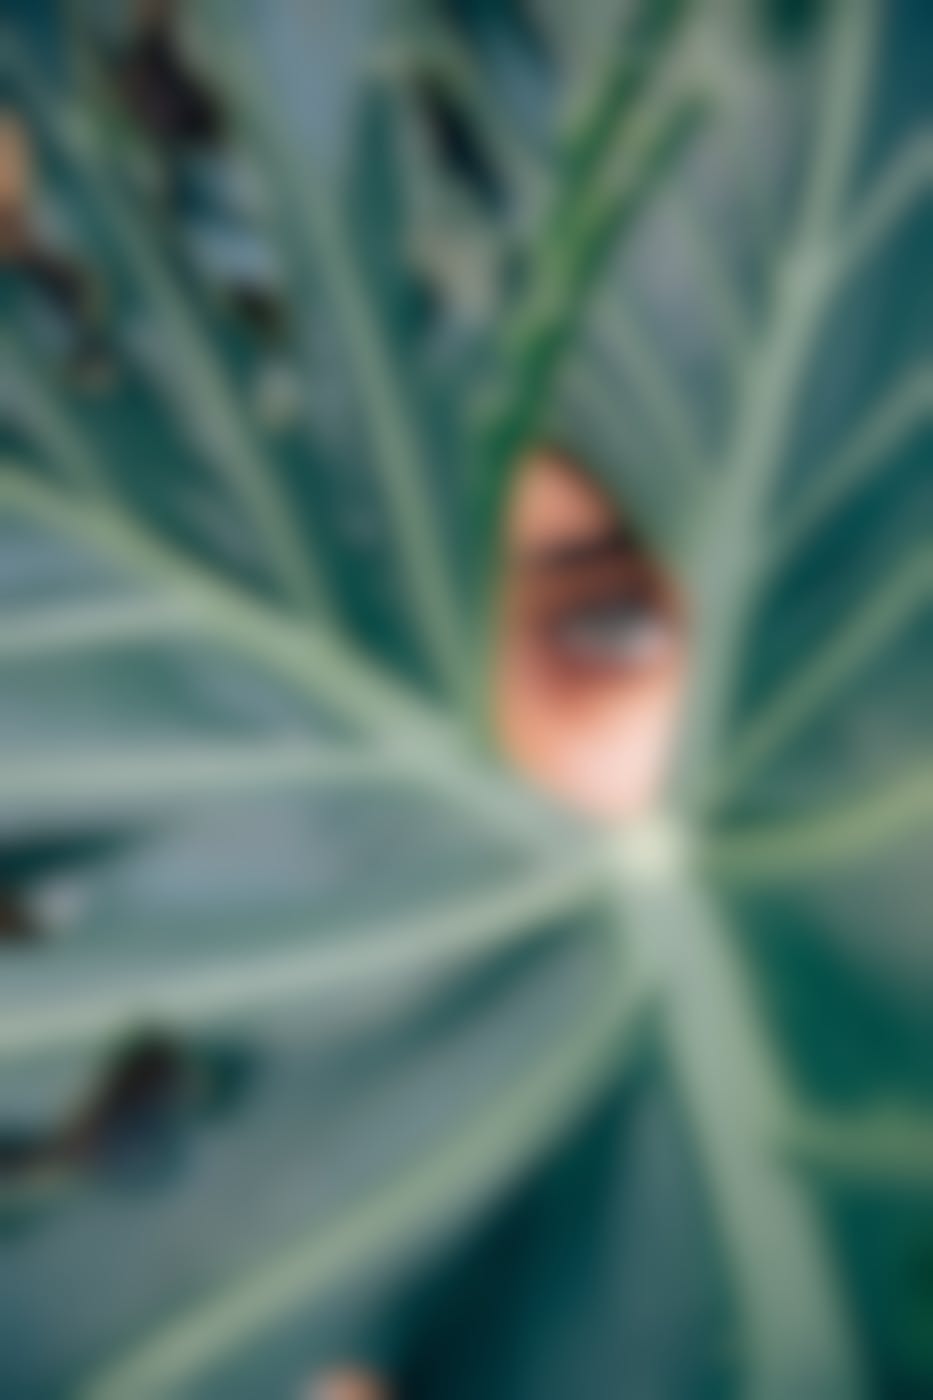 A woman's crystal blue eye looking out from behind lartge leaves